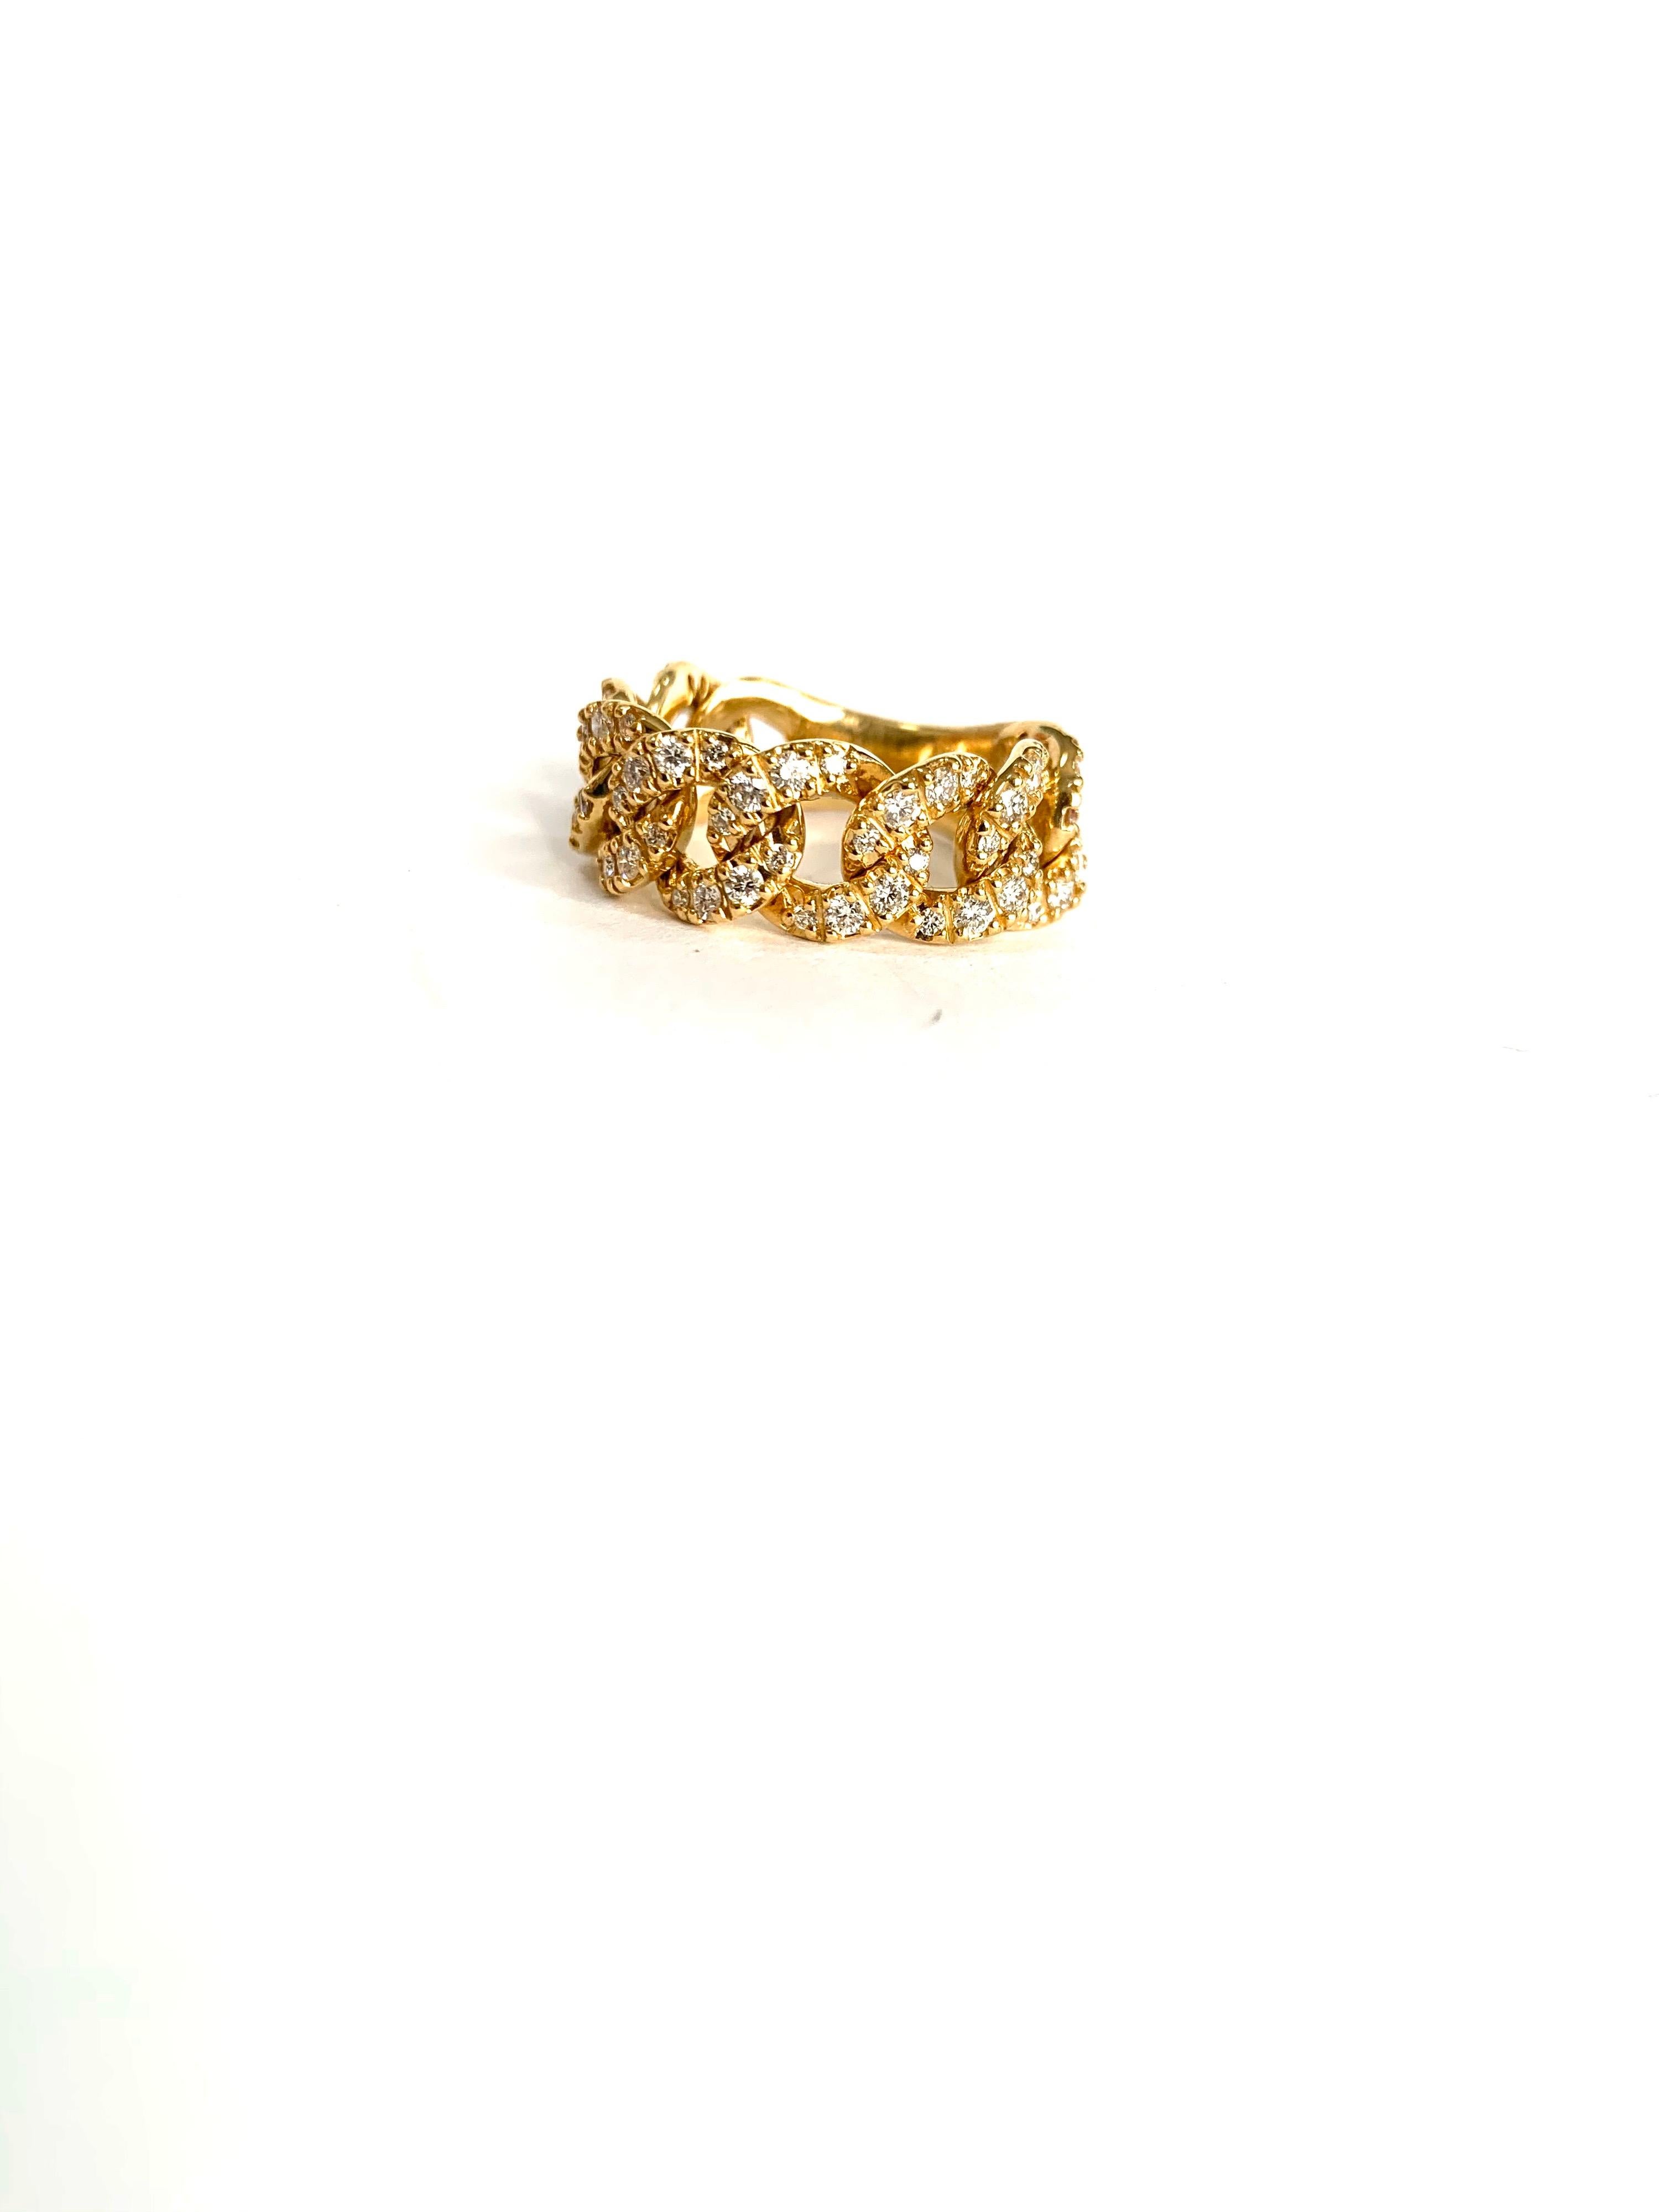 cuban solid yellow gold ring hand made in italy
weight of gold gr 8.5
white diamond clarity g quality vvs1 ct 0.80